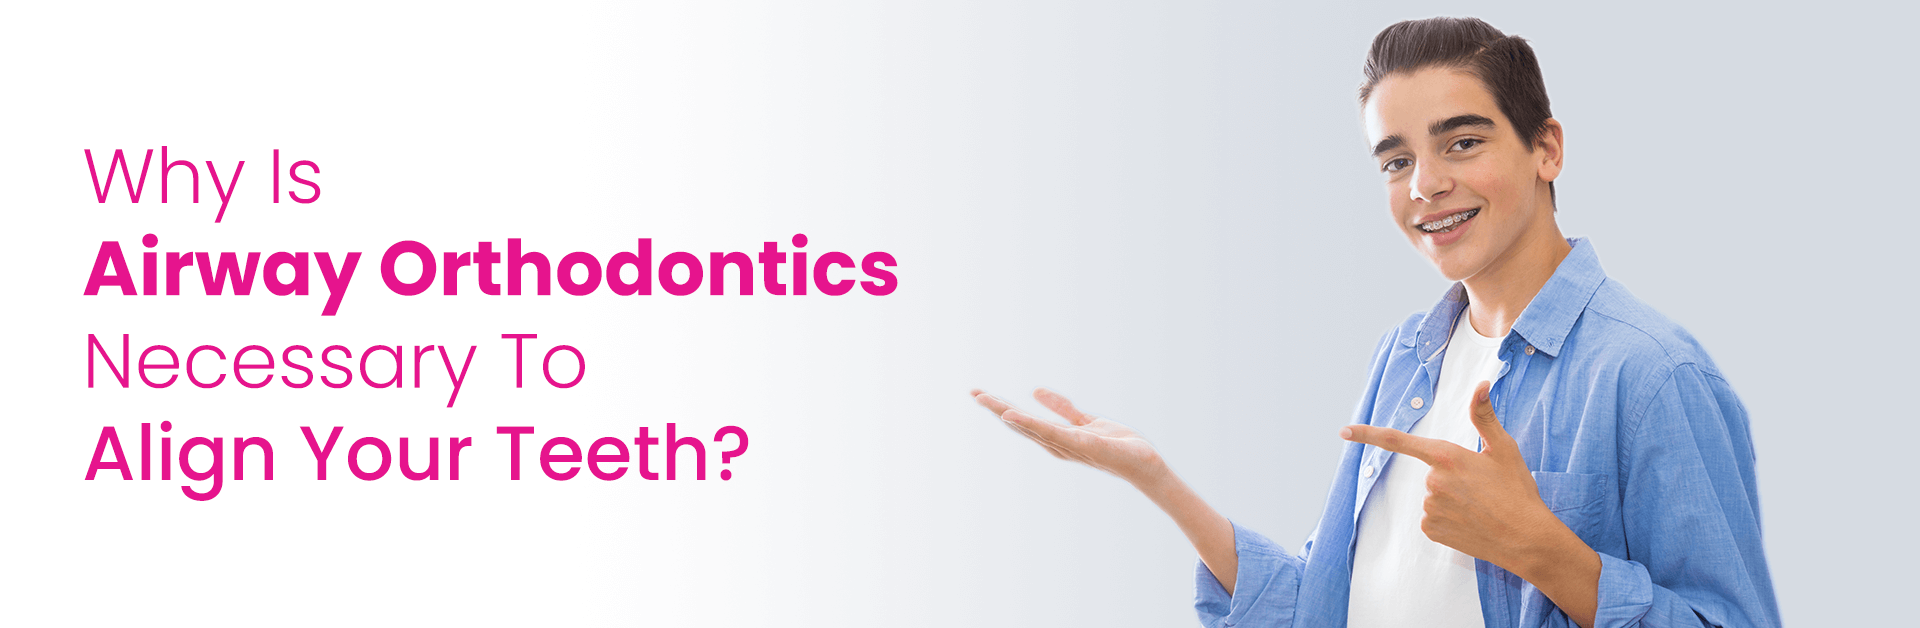 WHY IS AIRWAY ORTHODONTICS NECESSARY TO ALIGN YOUR TEETH?